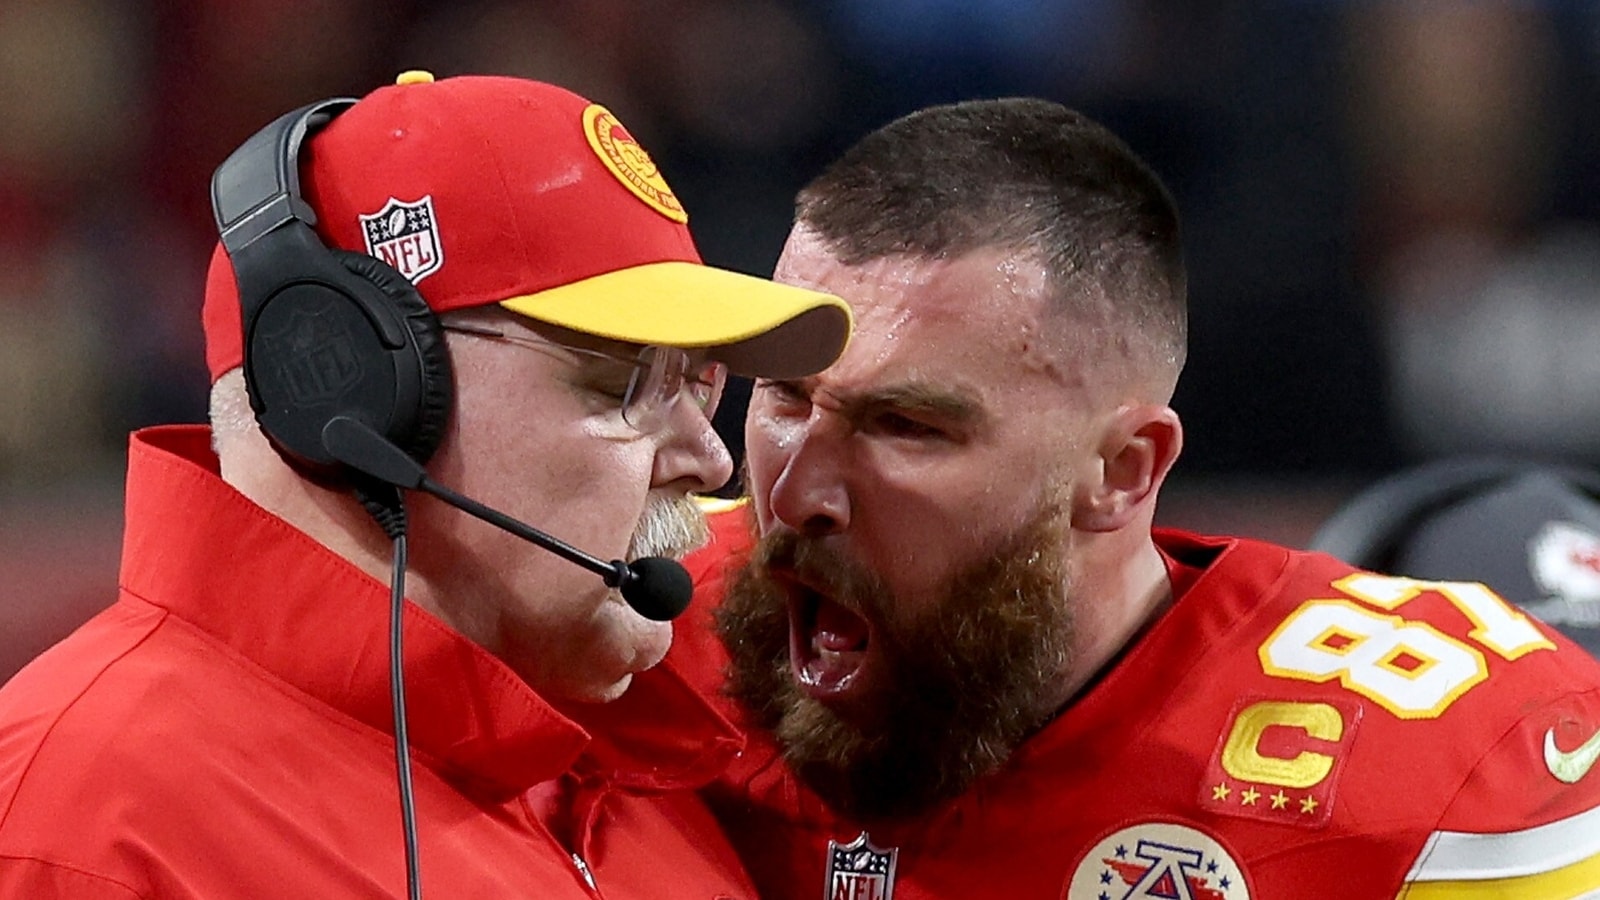 Travis Kelce's outburst at coach Andy Reid decoded! Here's what he may said, according to lip reading experts